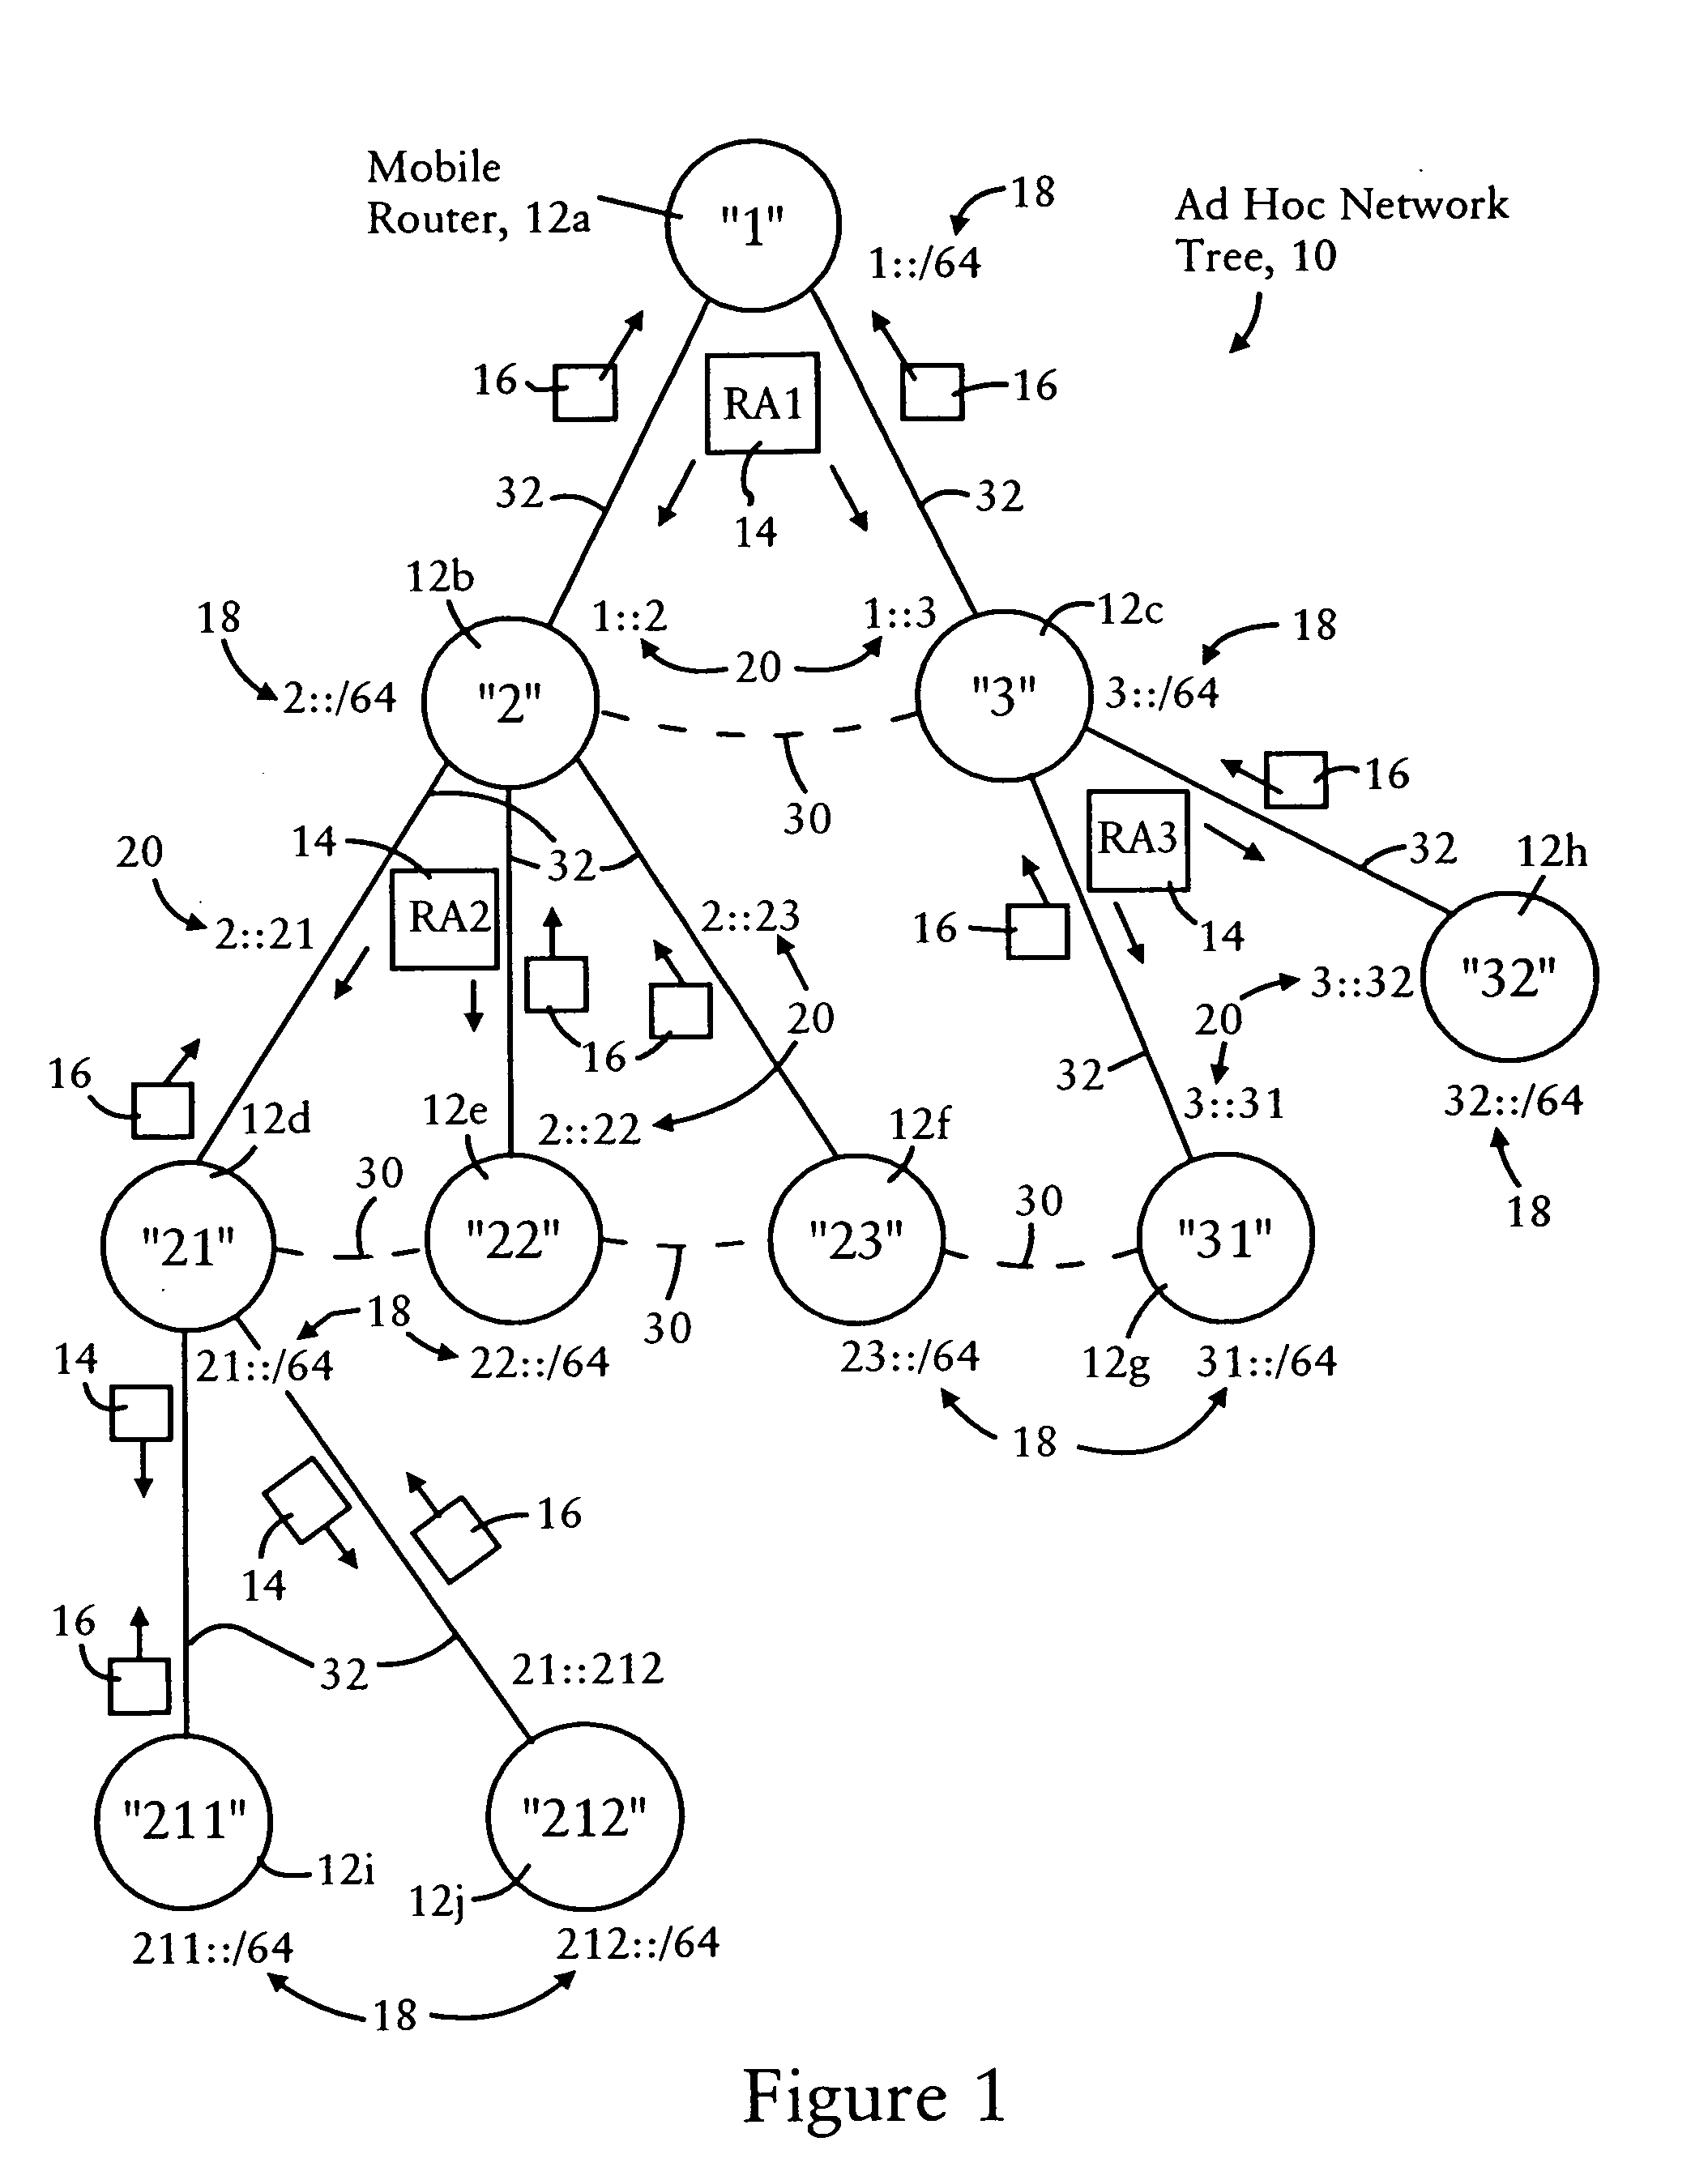 Arrangement for providing optimized connections between peer routers in a tree-based ad hoc mobile network